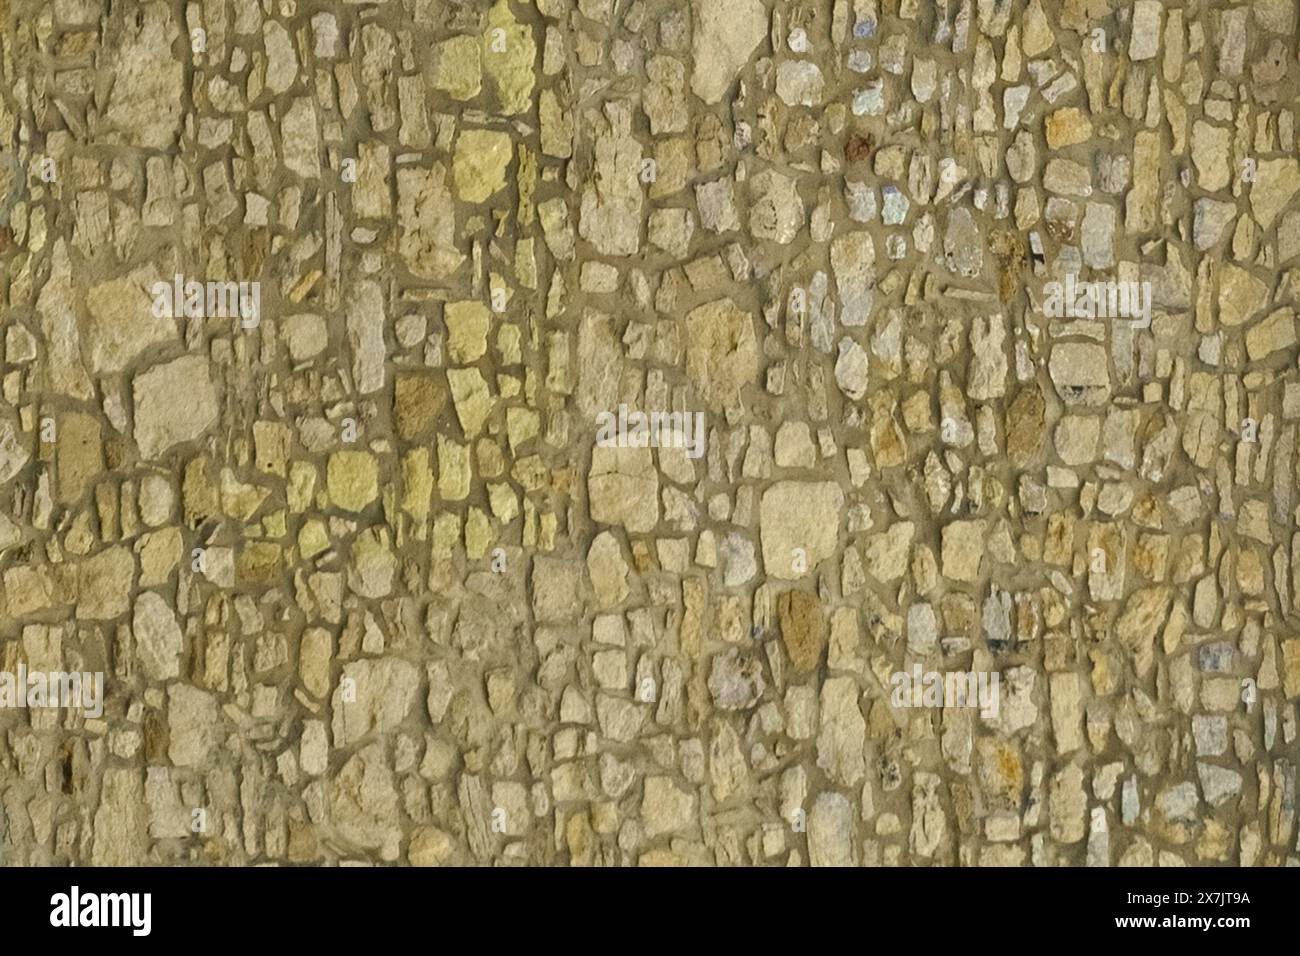 A detailed close up view of a textured stone wall showcasing its unique patterns and rough surface. Stock Photo